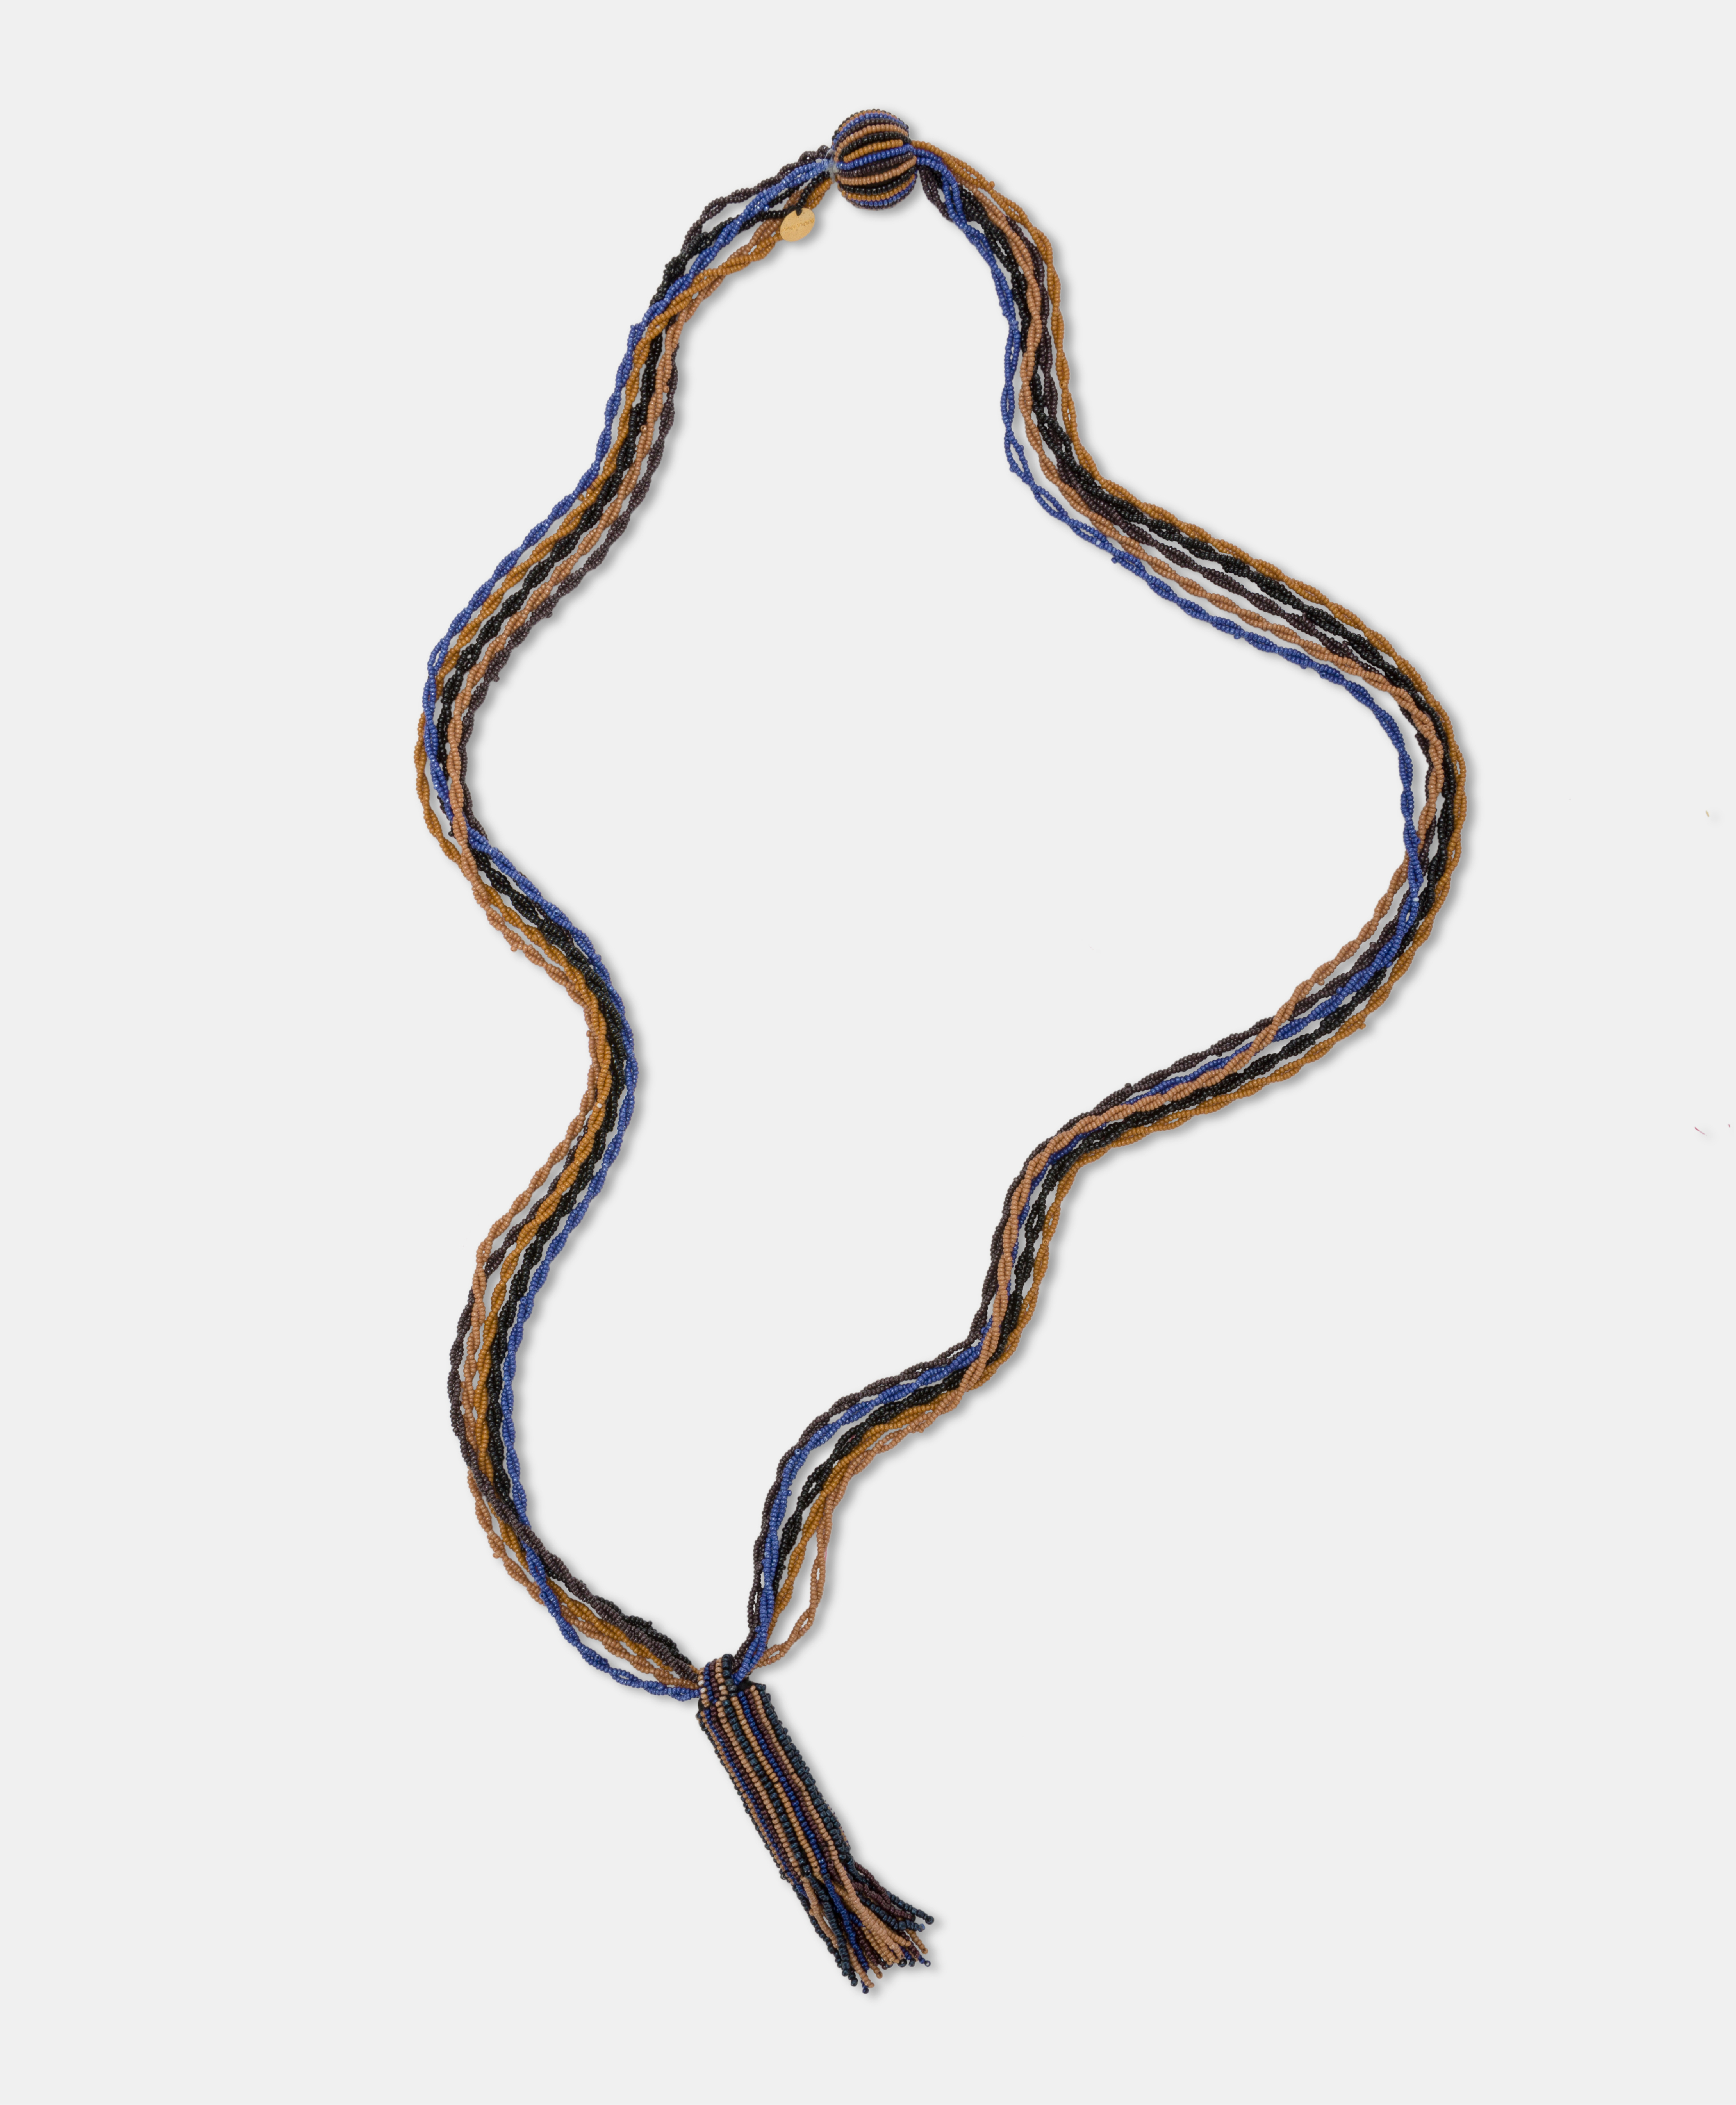 HIMONO NECKLACE WITH BEADS - NBLUE MULTICOLOR - Momonì